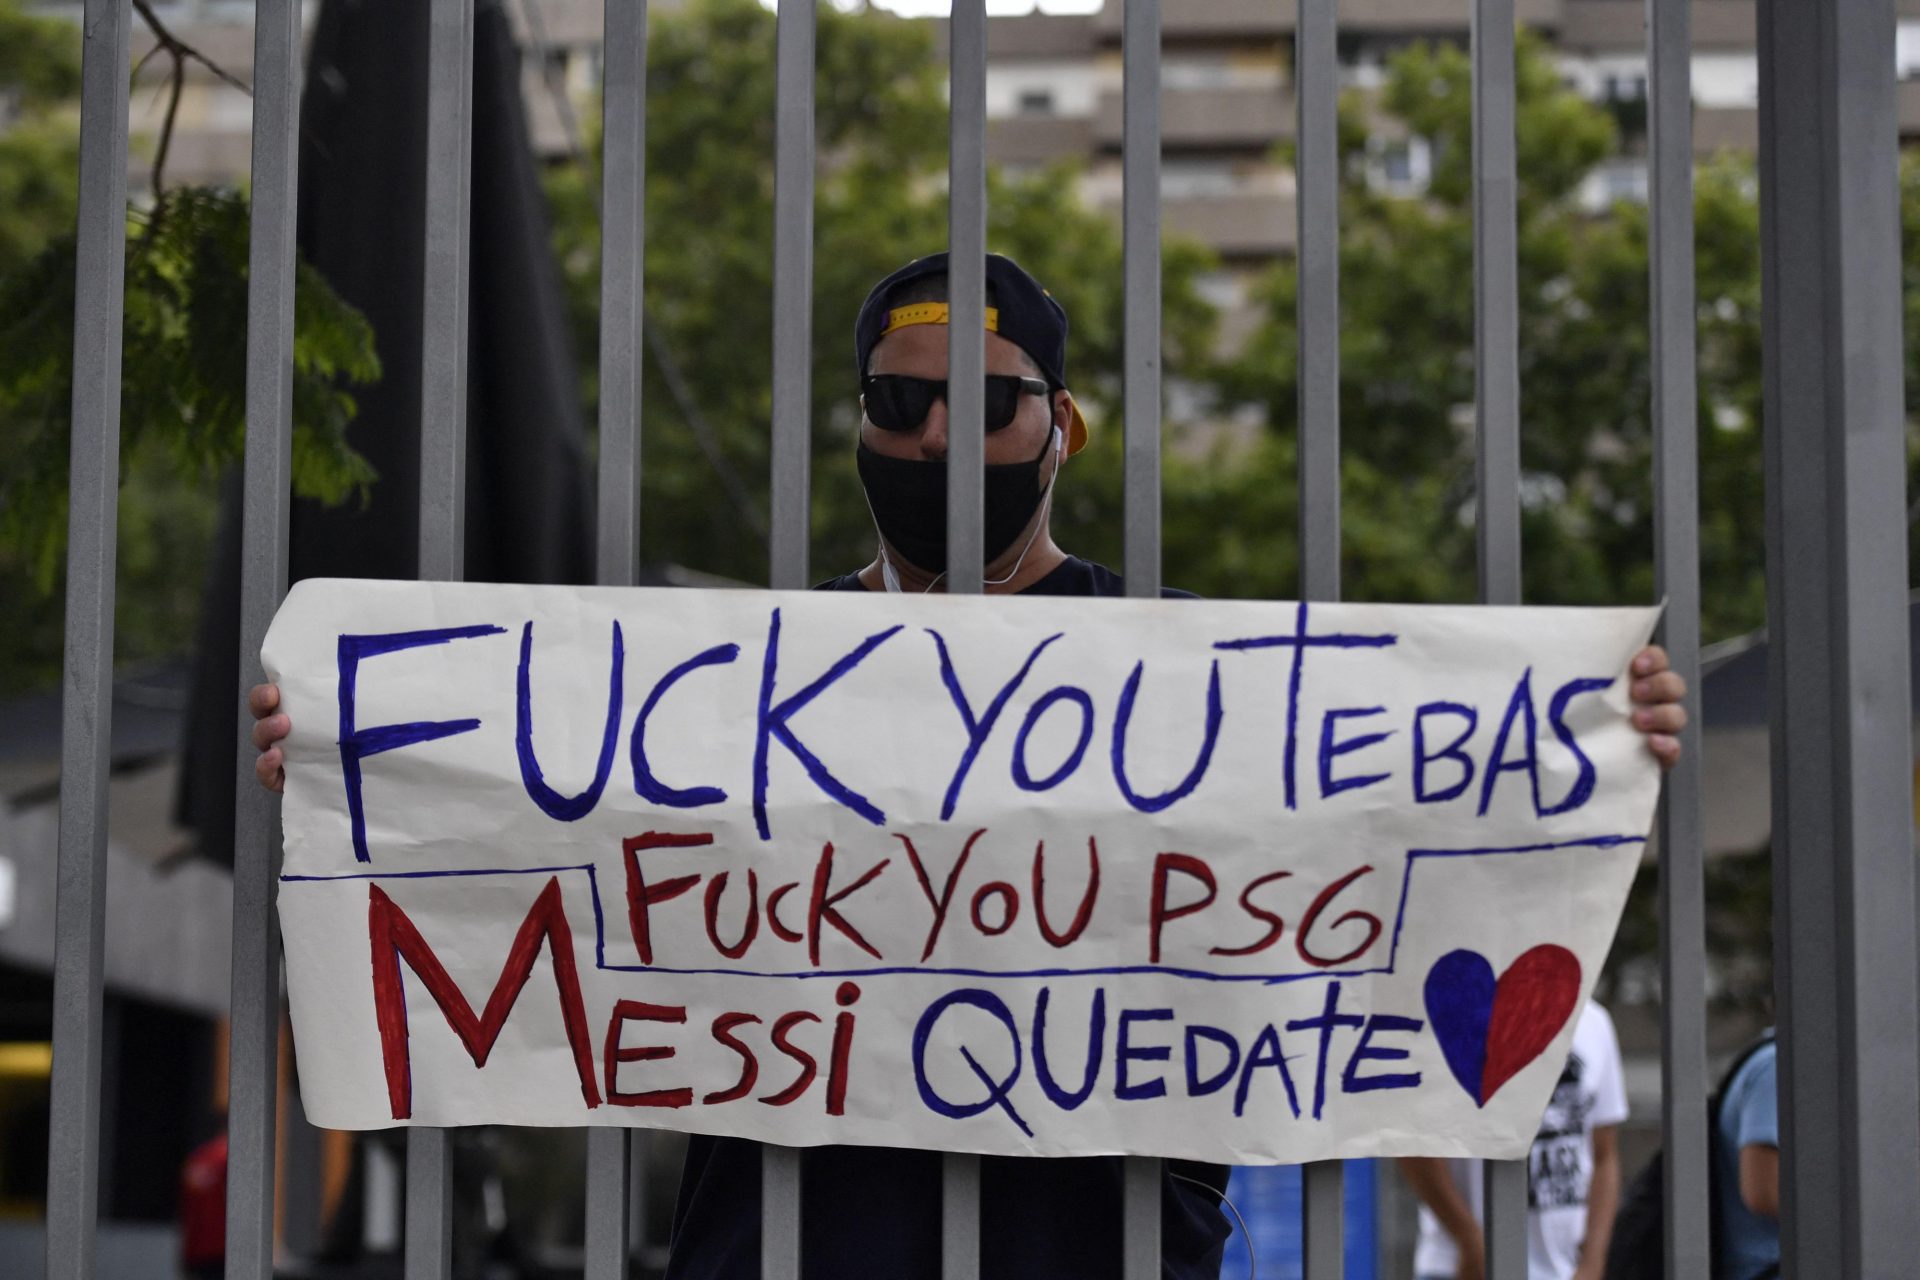 A Barcelona fan makes his feelings clear about Javier Tebas after the departure of Lionel Messi to PSG. Photo: Pau Barrena/AFP via Getty Images.